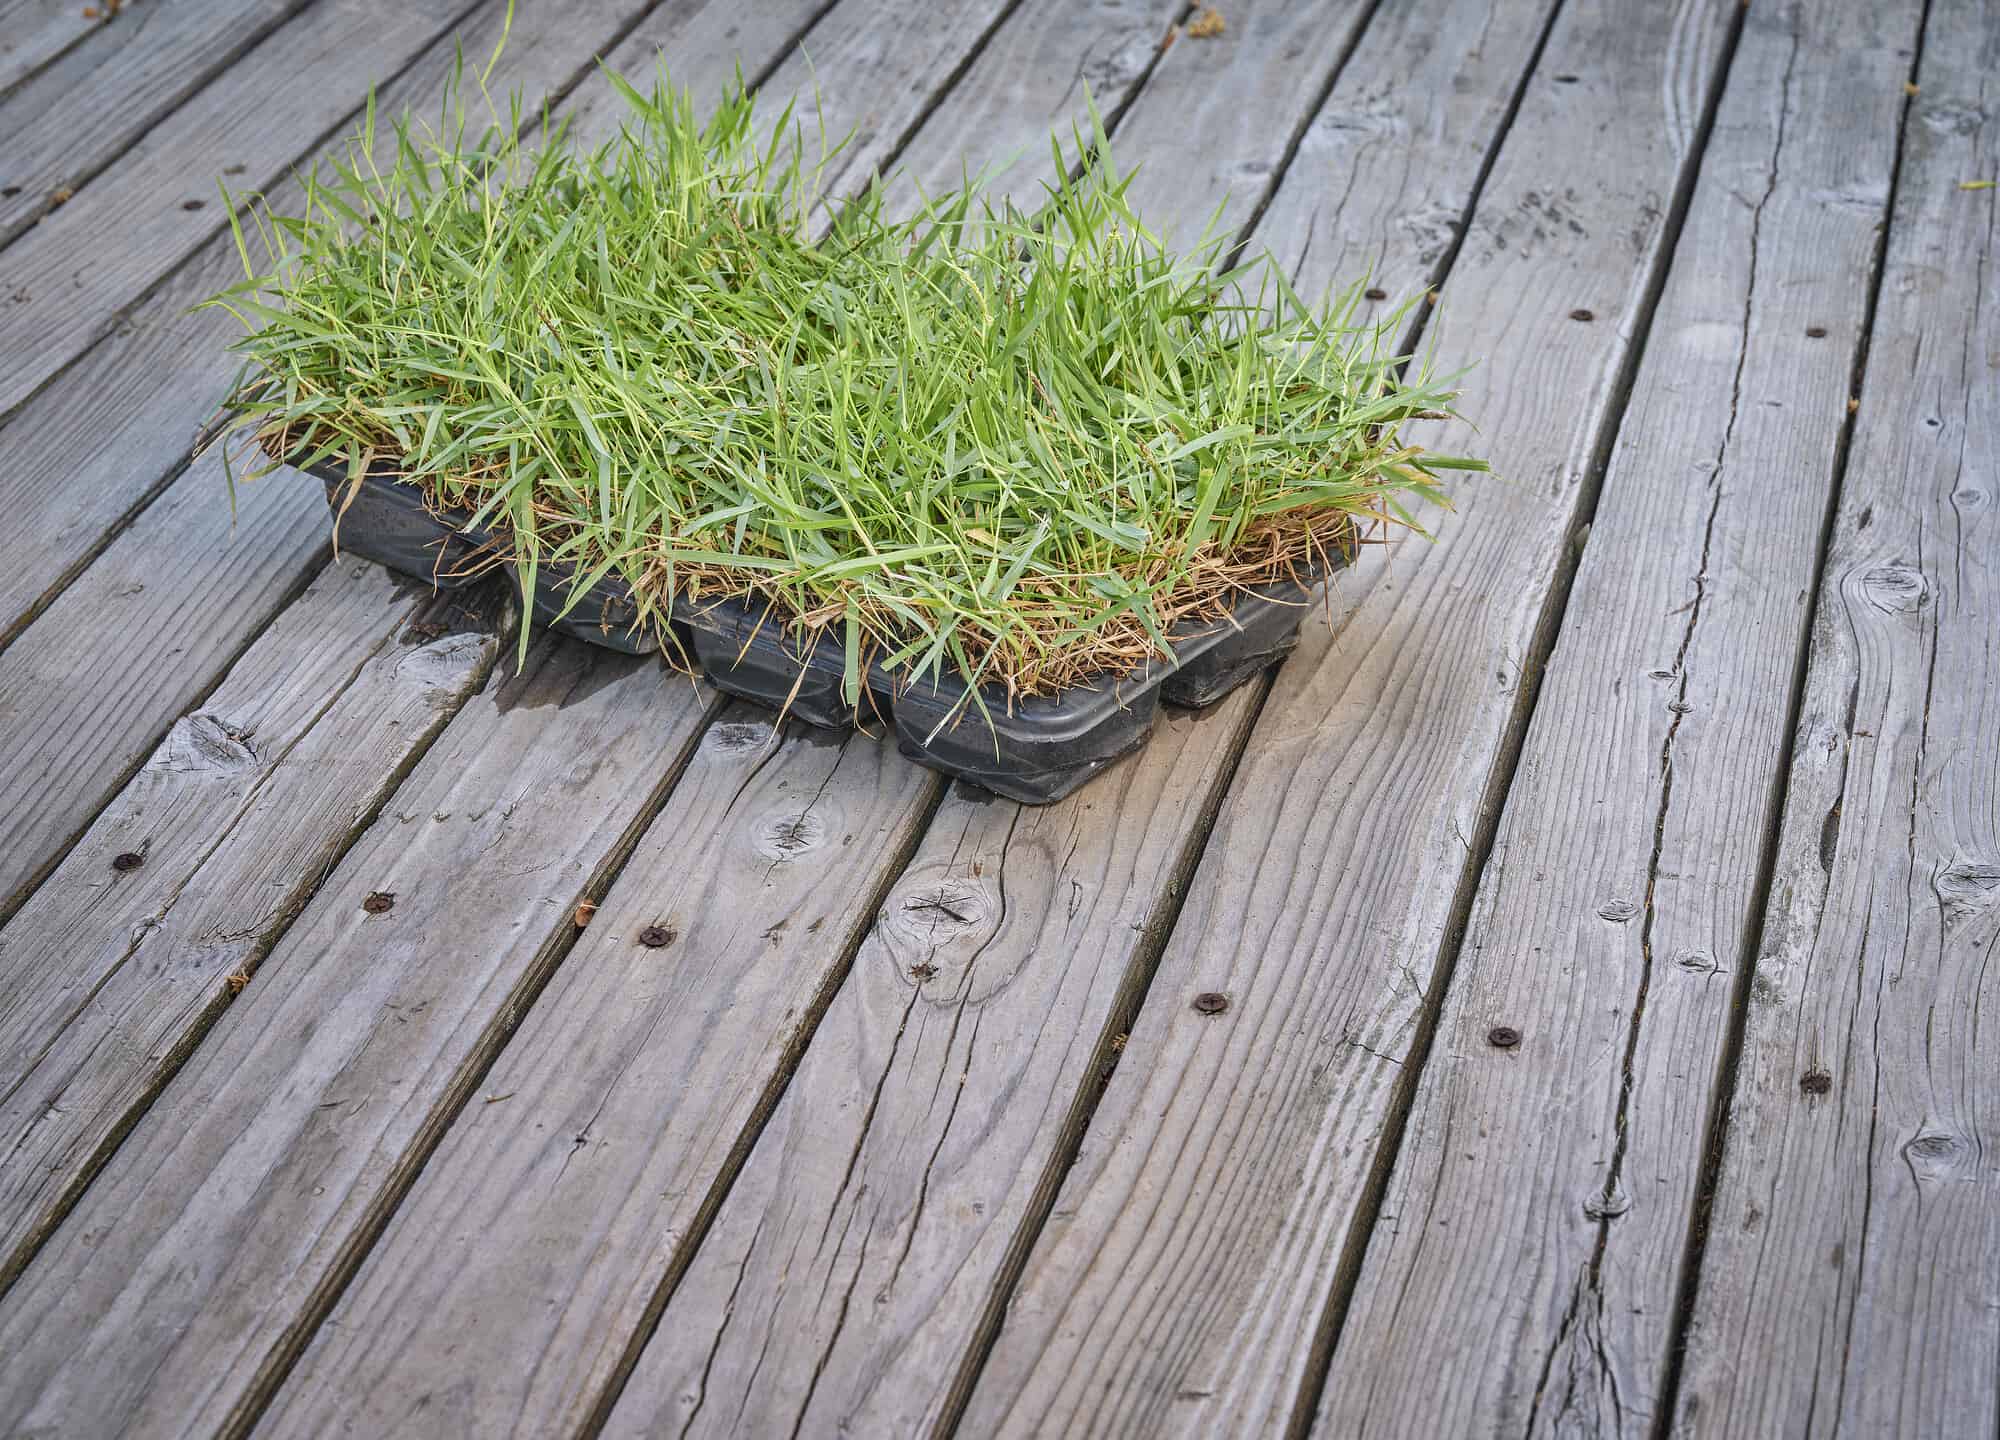 Plug of Zoysia grass on wooden deck